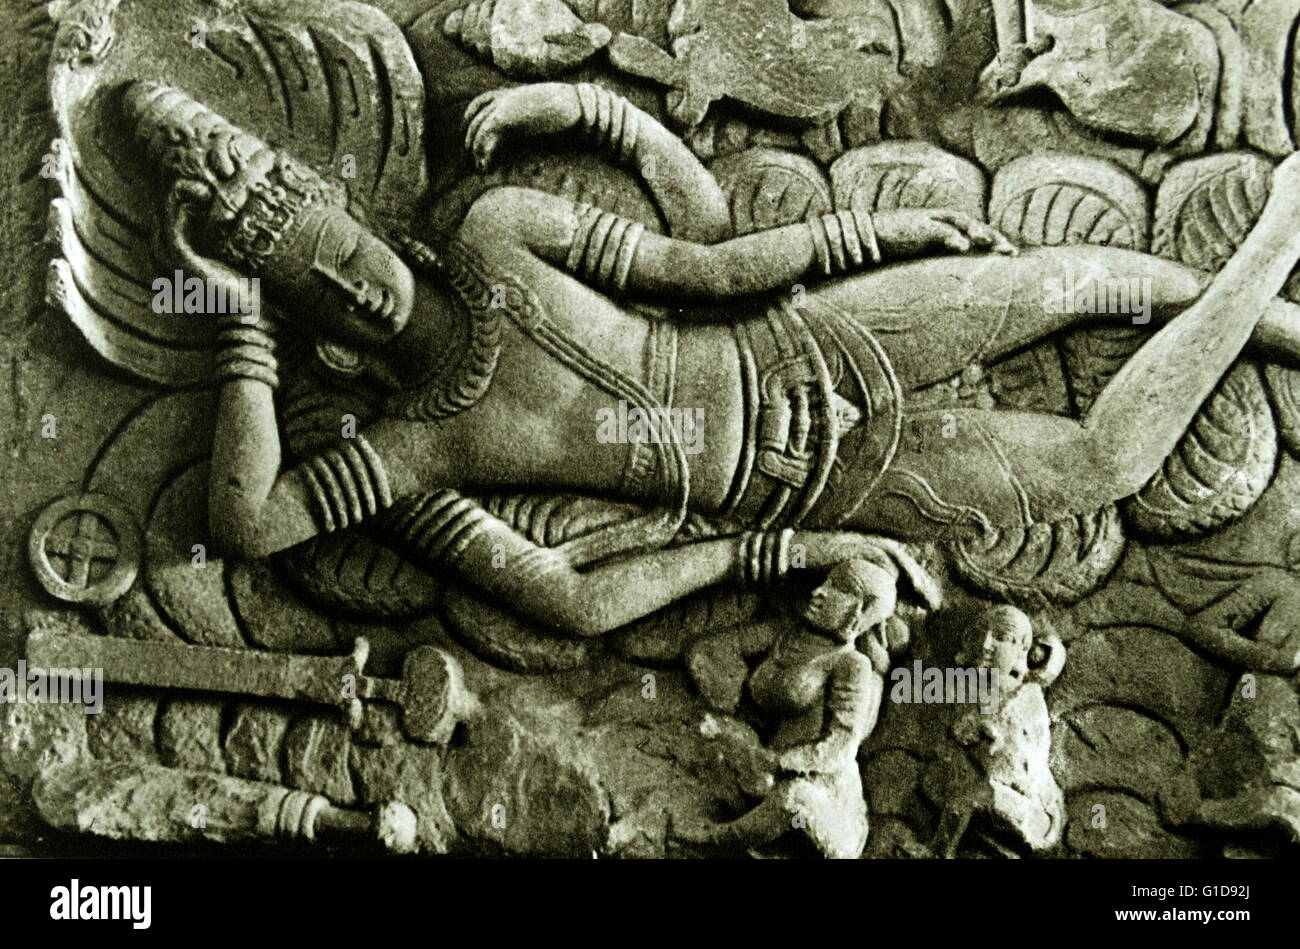 Why is Lord Vishnu in his sleeping pose touching a Linga? - Quora